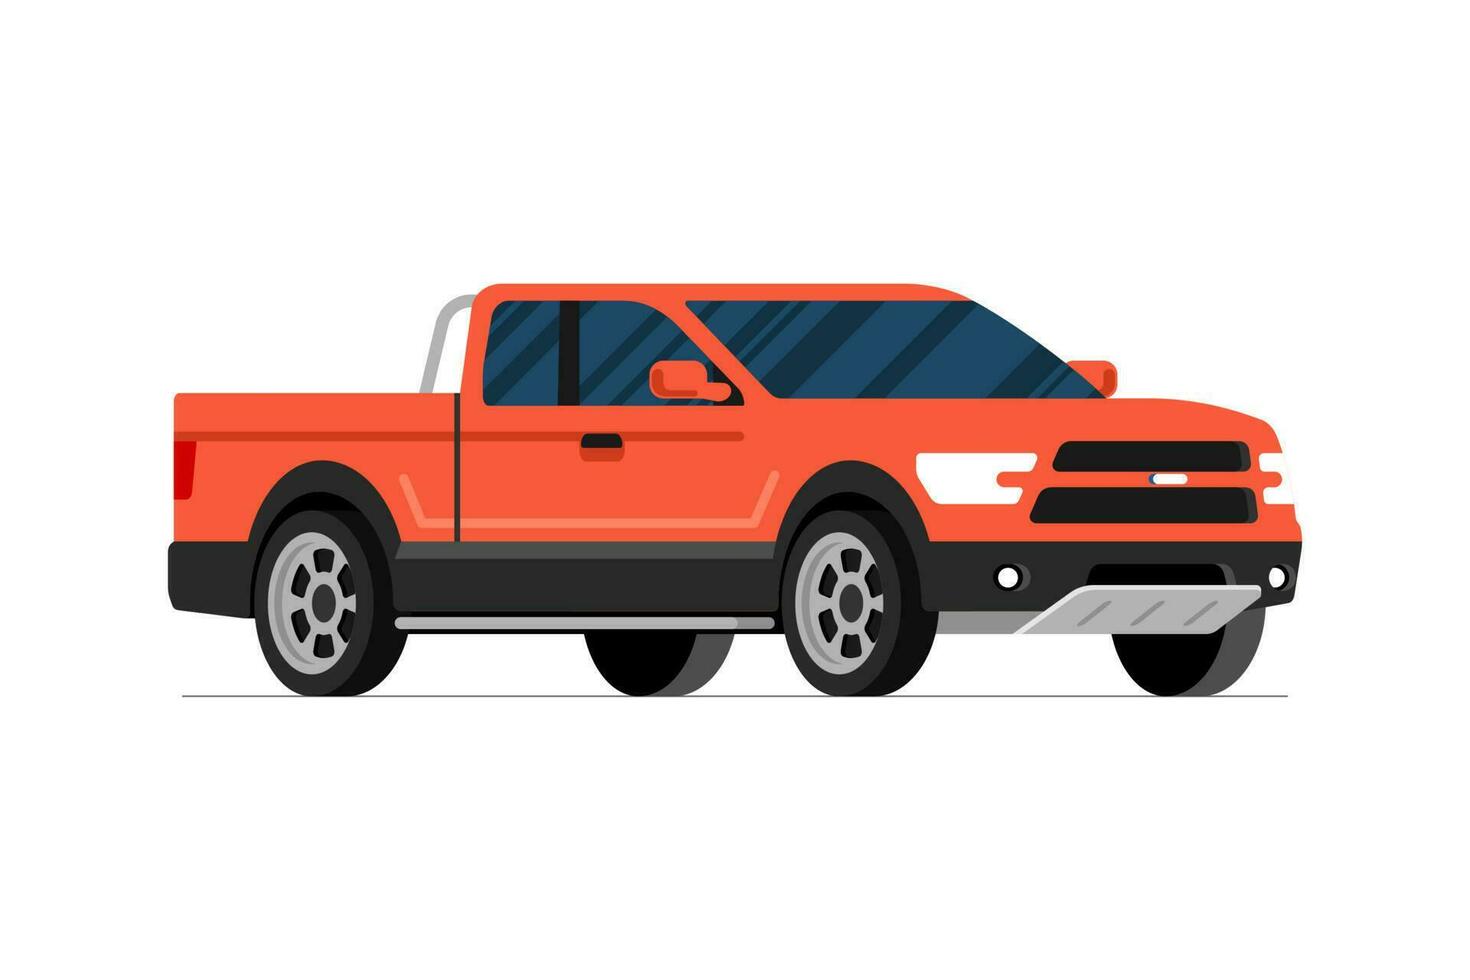 American suv pickup. 4x4 red truck isometric view. Off-road car on white background. Modern offroad transport. Passenger vehicle with cargo body isolated vector eps illustration in flat style